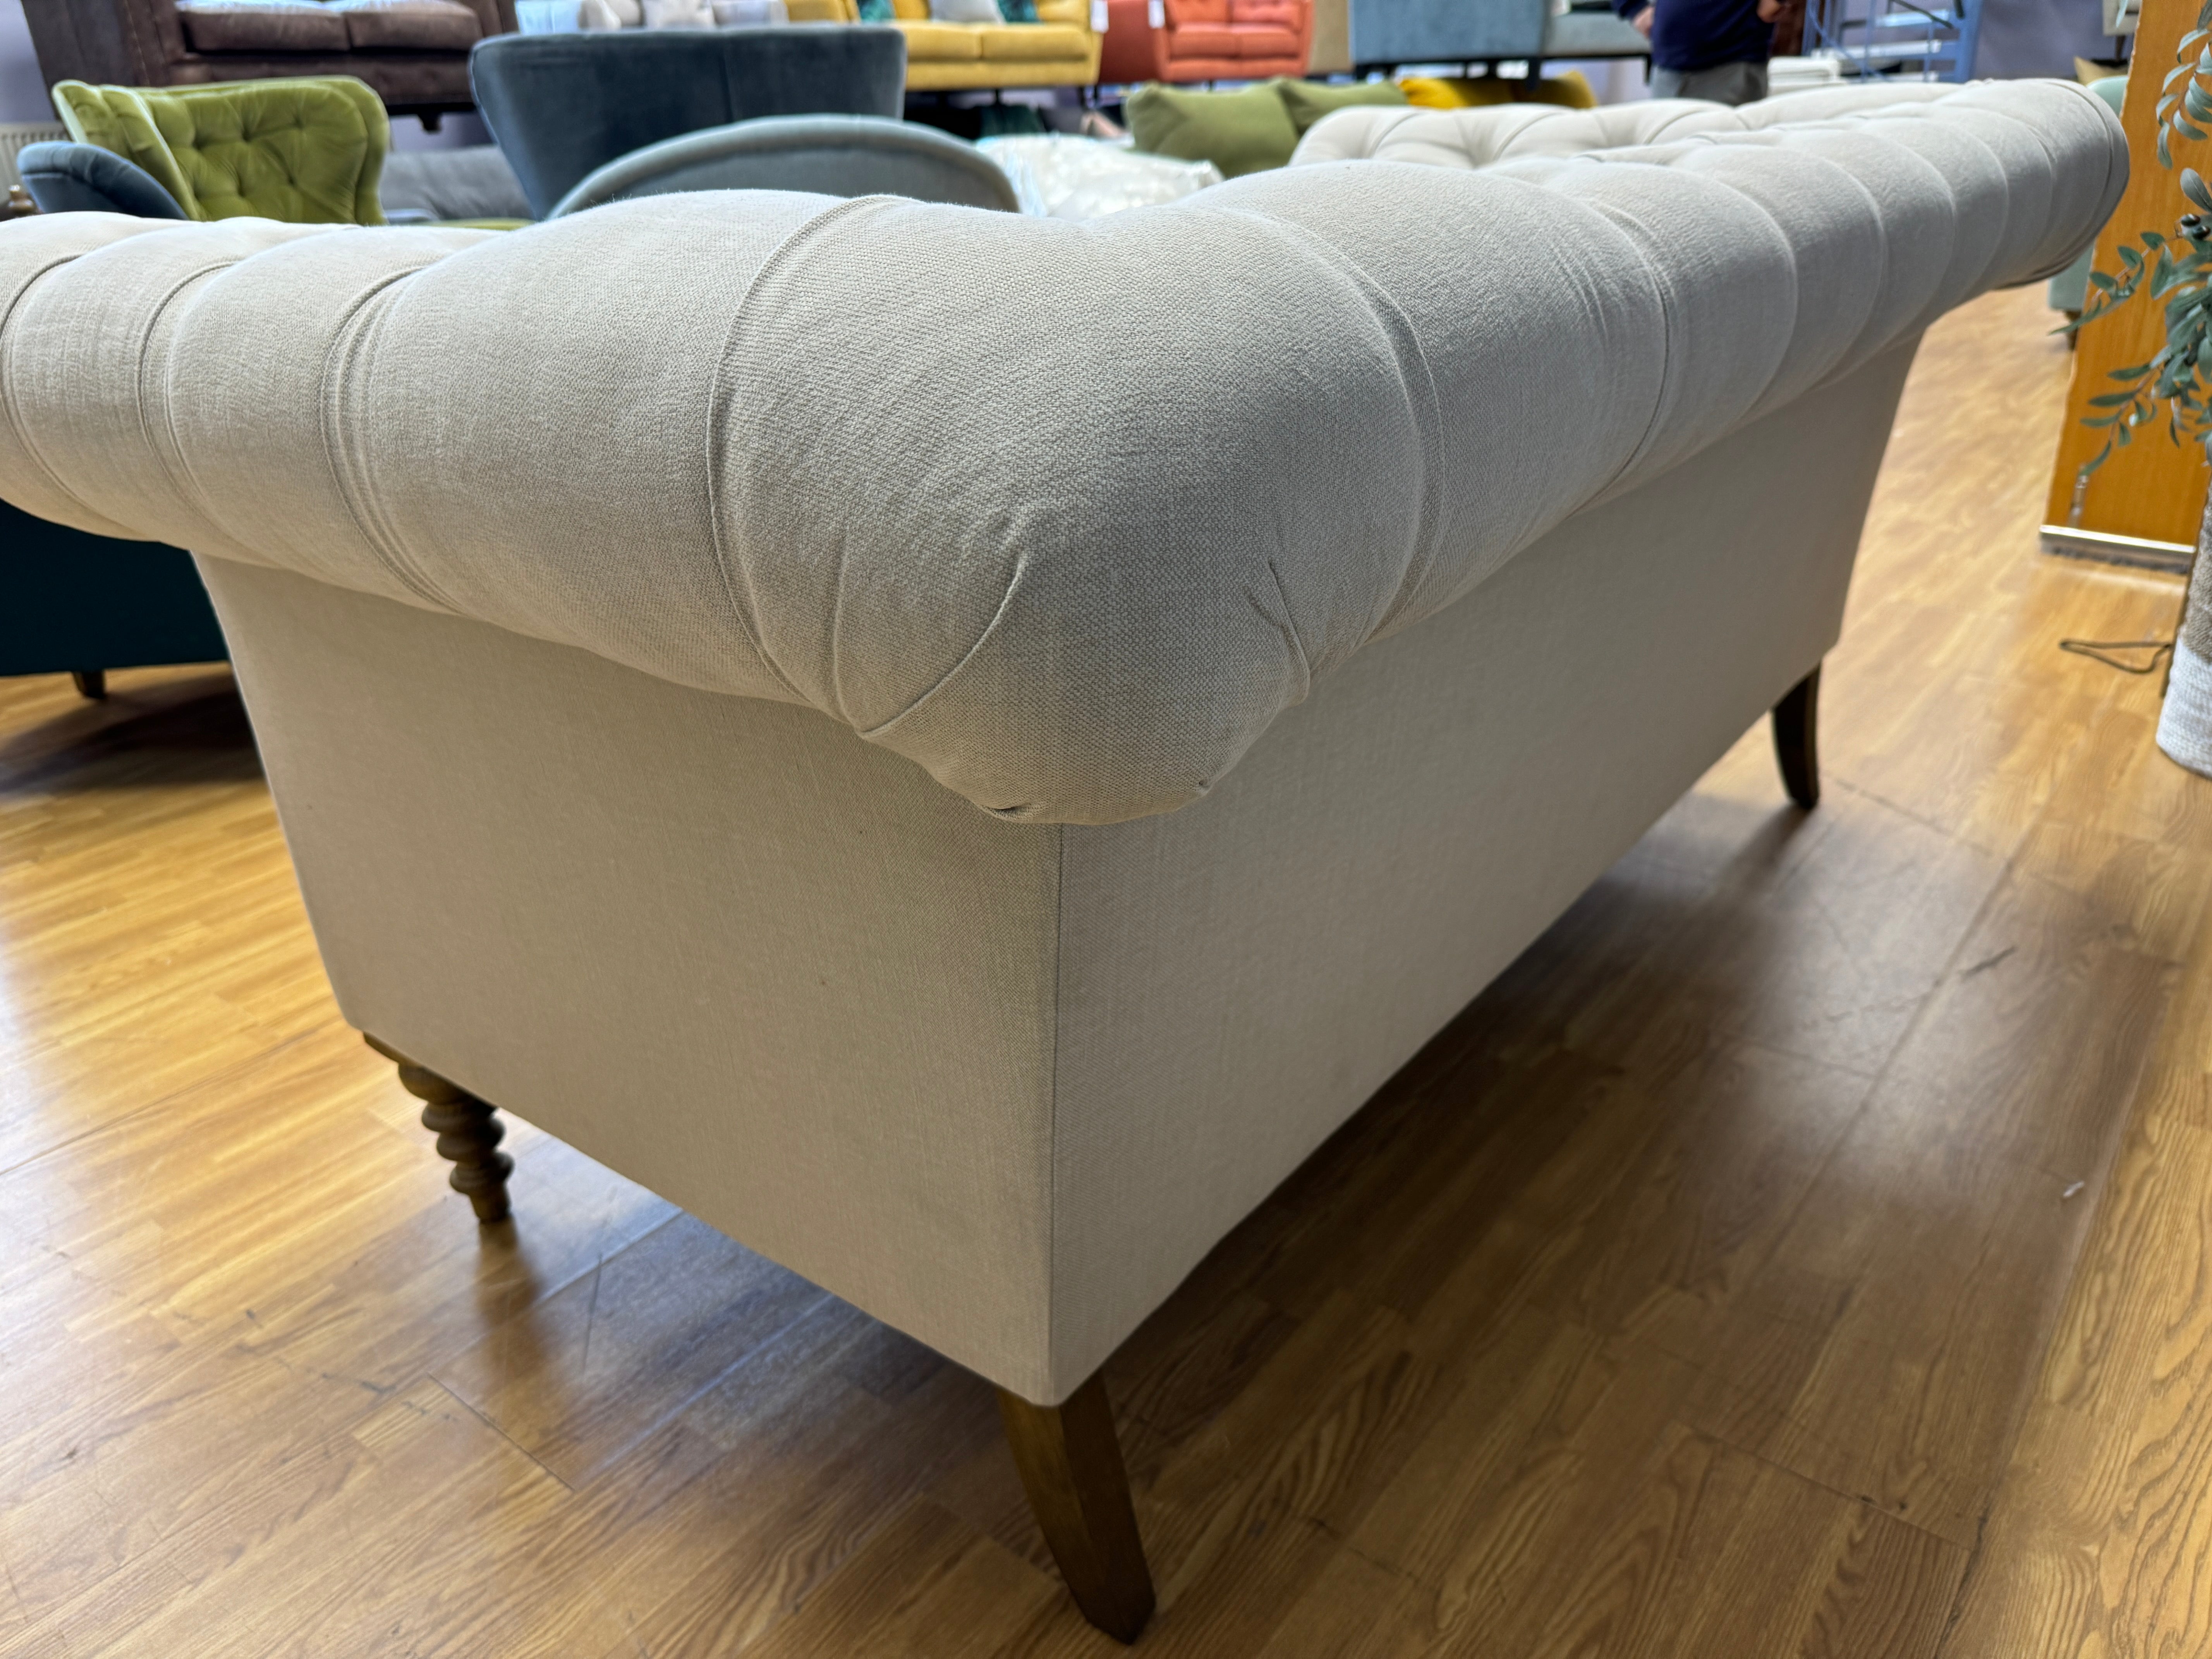 SOFA.COM Oscar 2 seater Chesterfield sofa Taupe brushed linen cotton